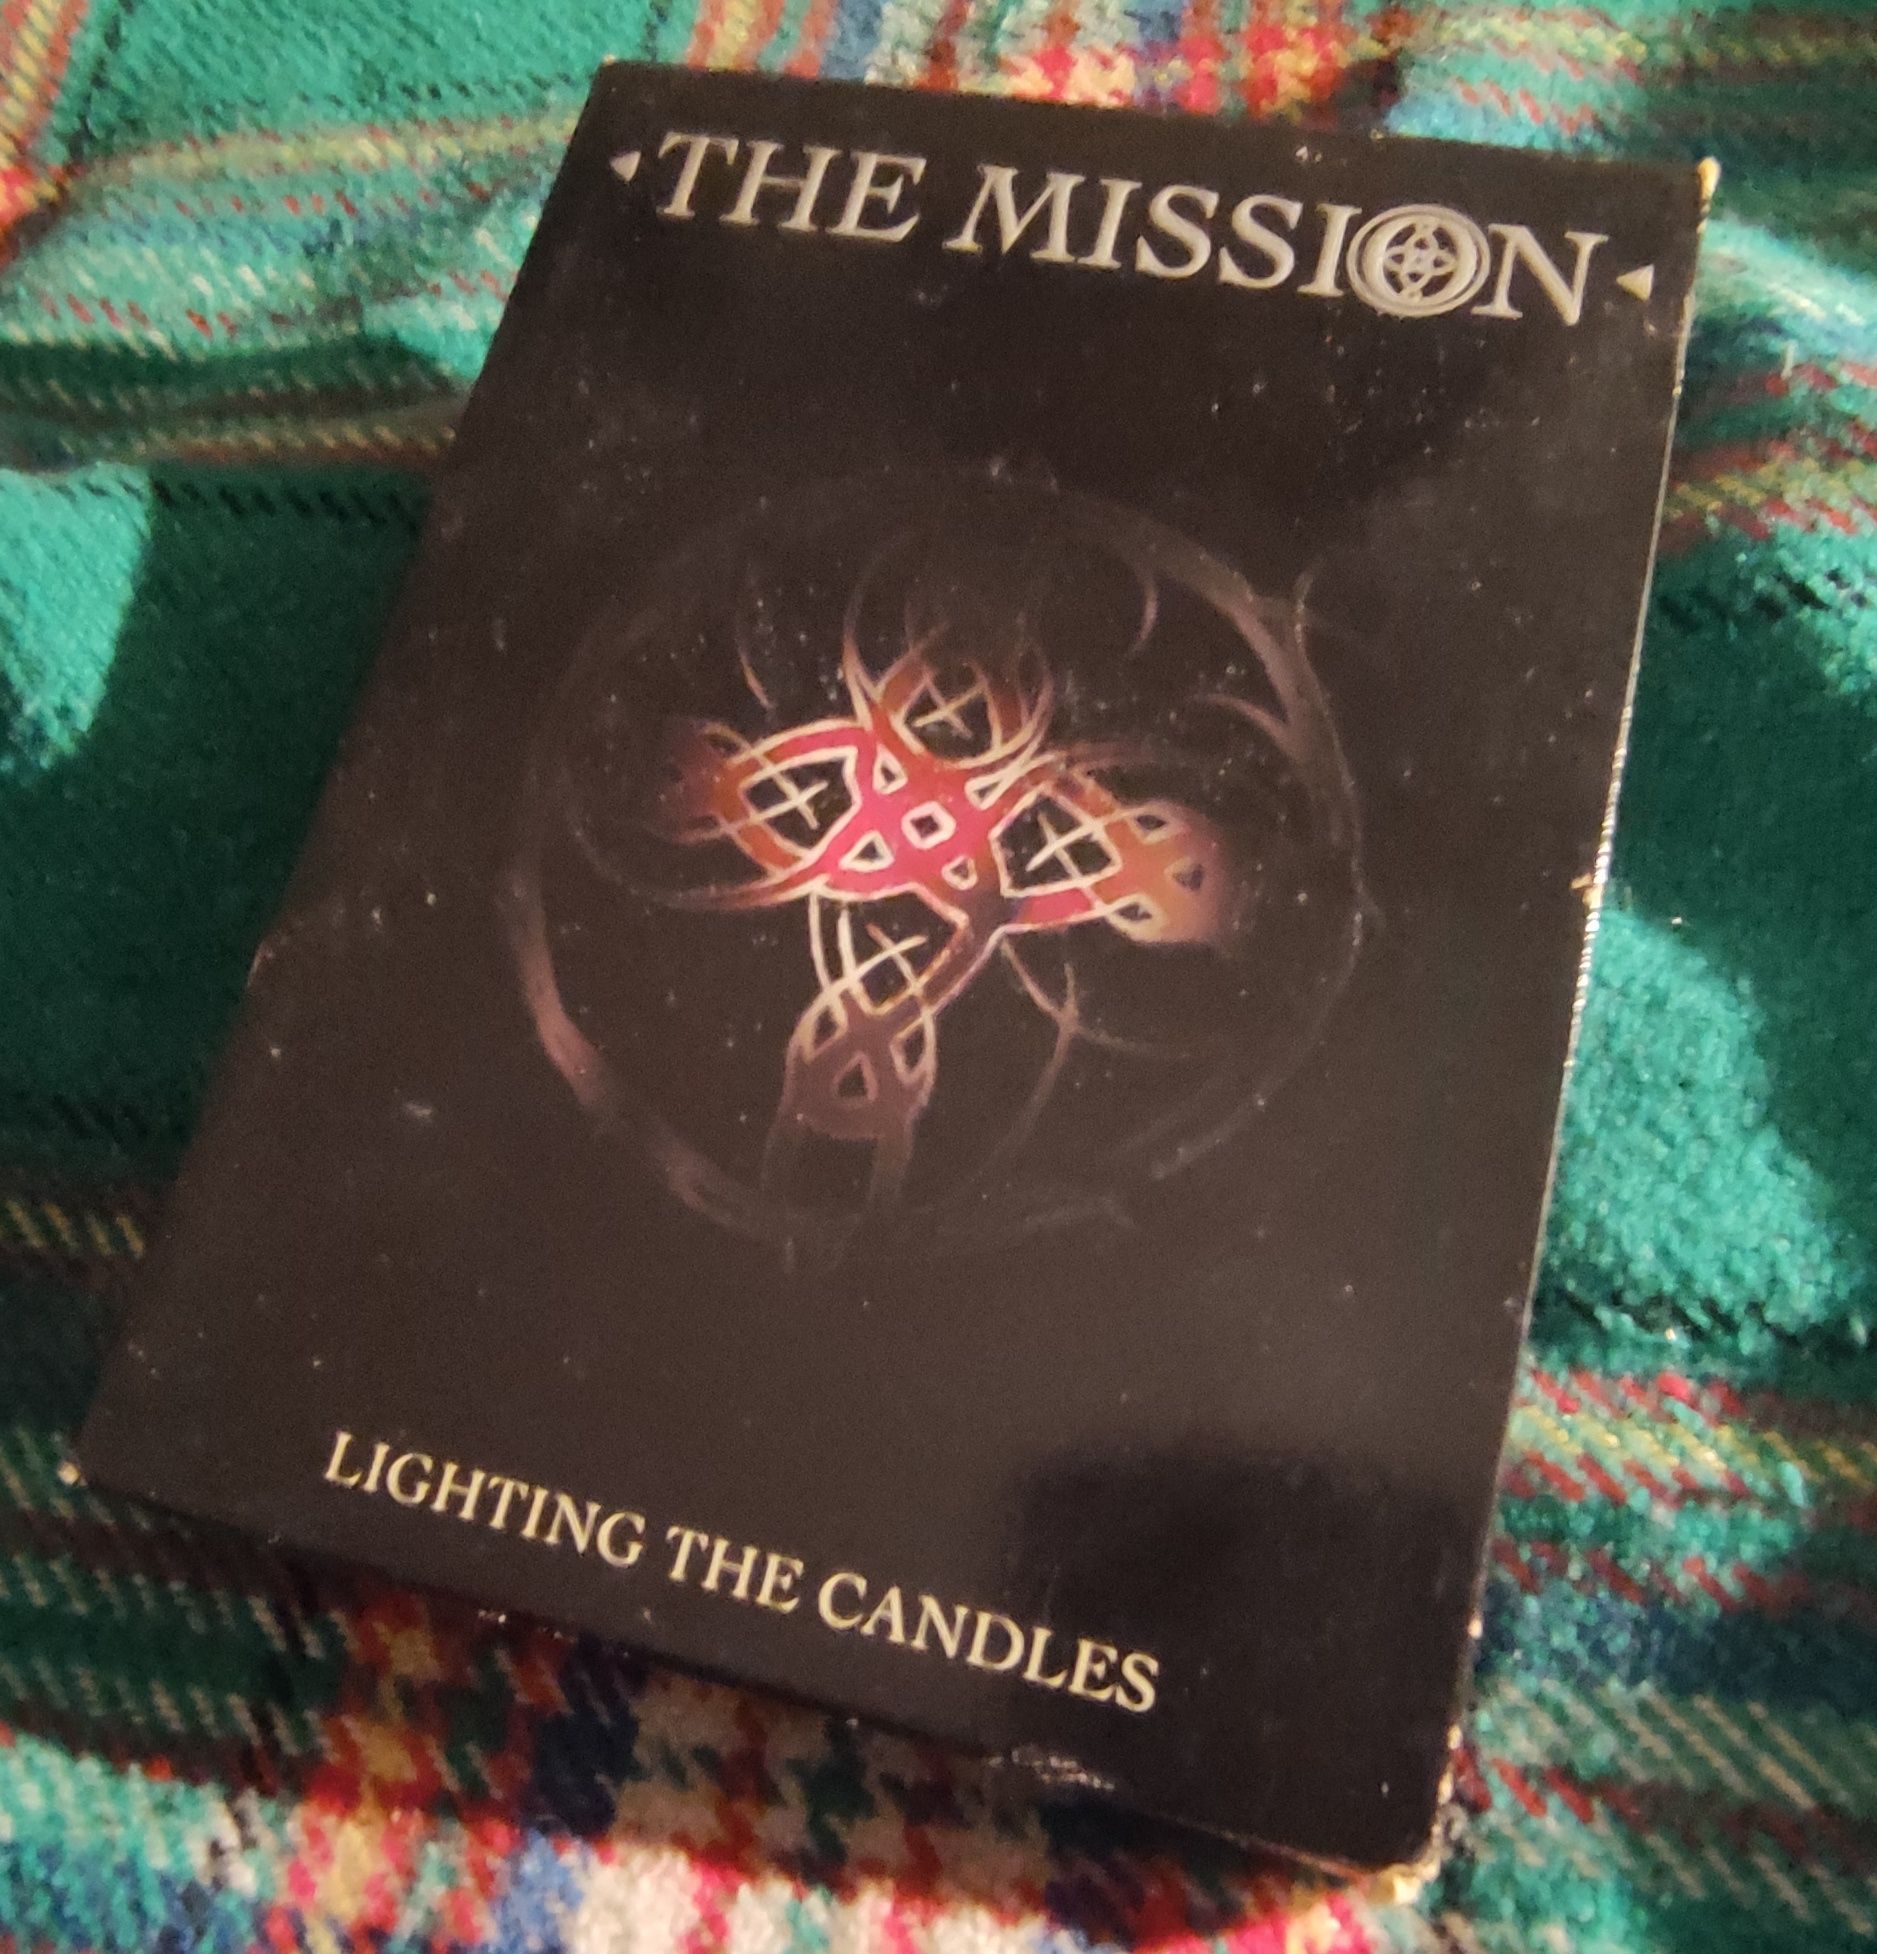 The Mission Lighting The Candles goth post punk